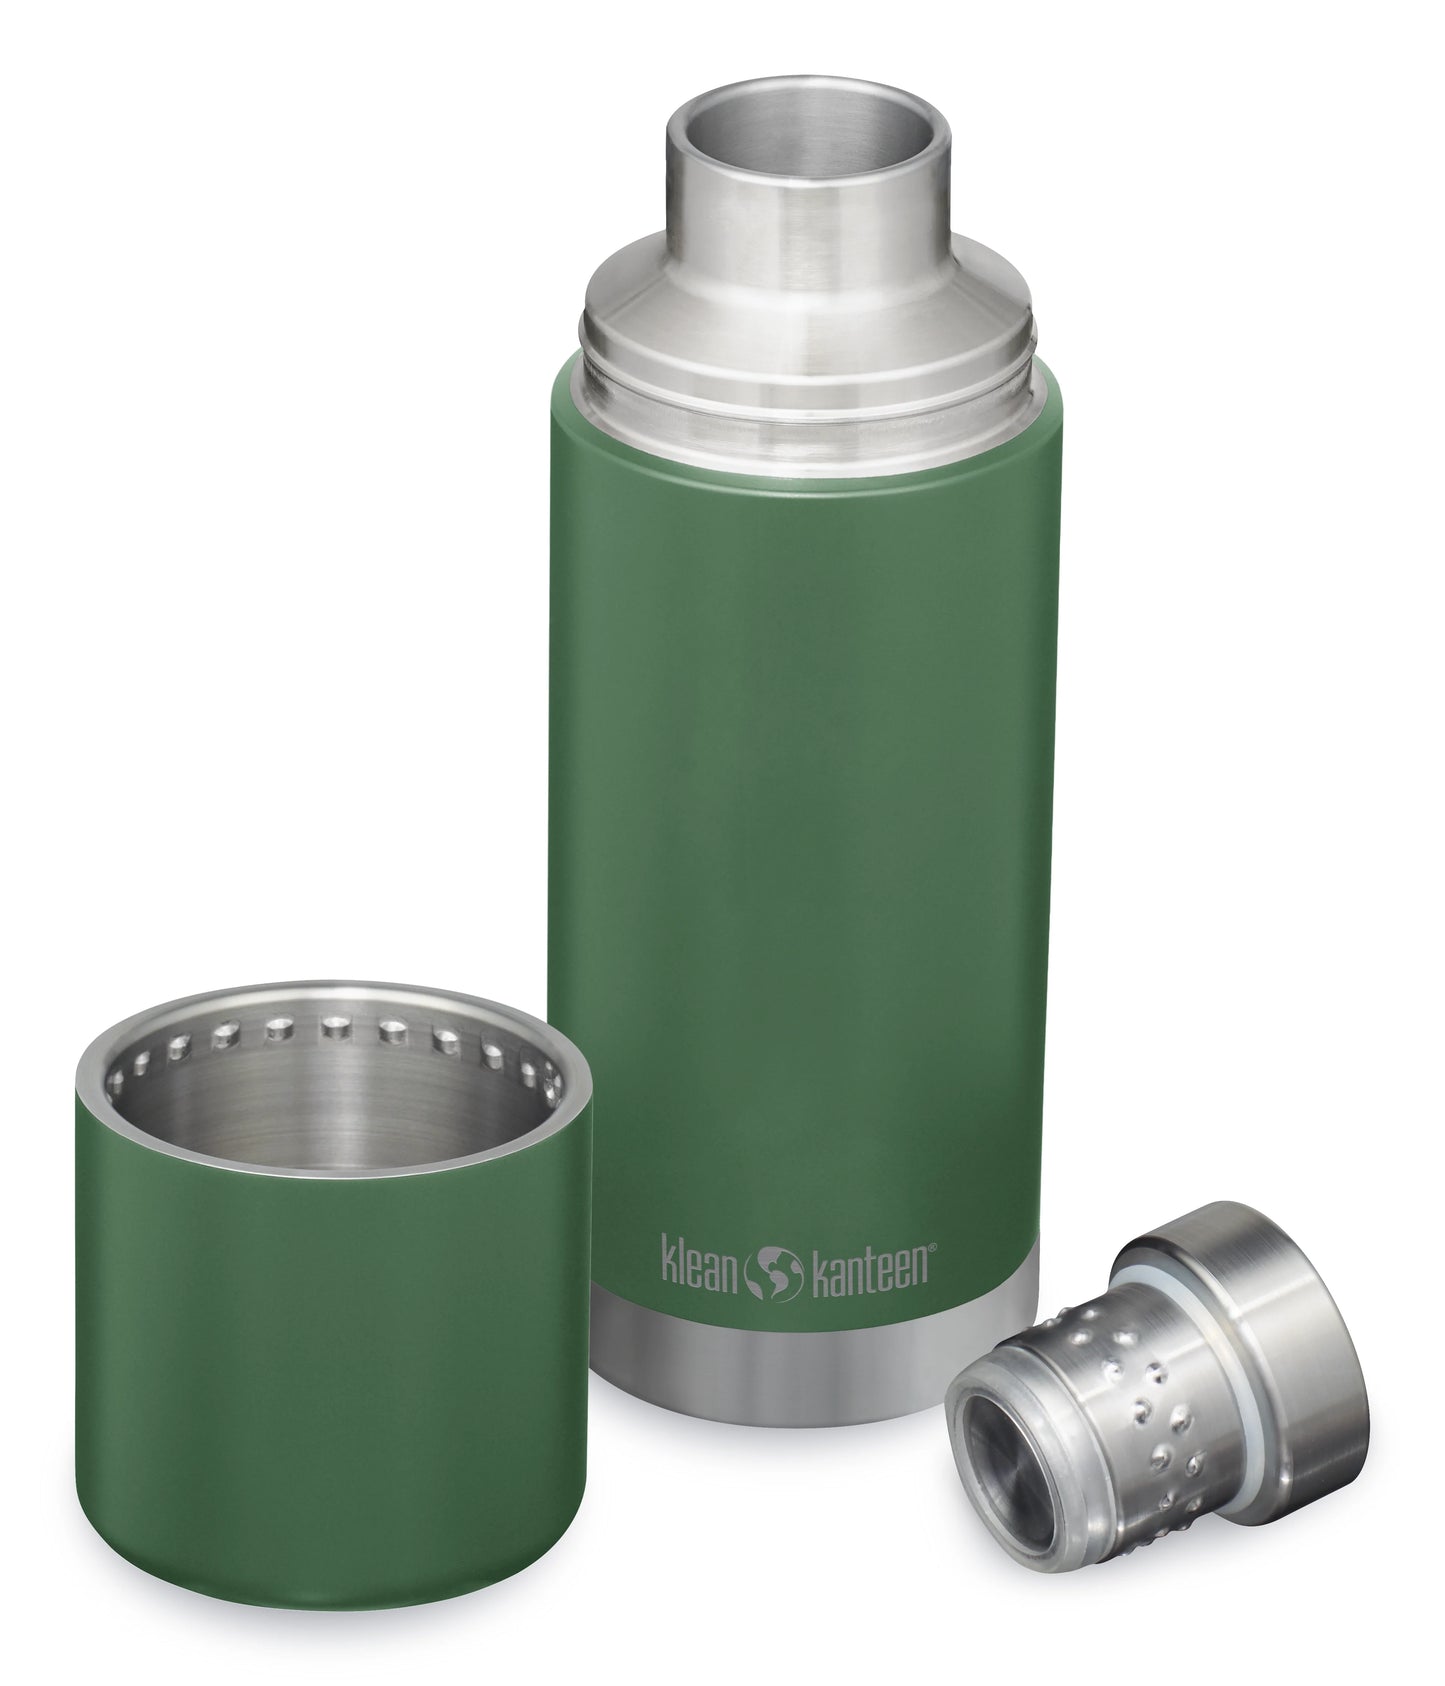 Klean Kanteen TKPro With Stainless Steel Cup 25oz (750ml), Insulated (28 Hrs Hot, 90 Hrs Iced)